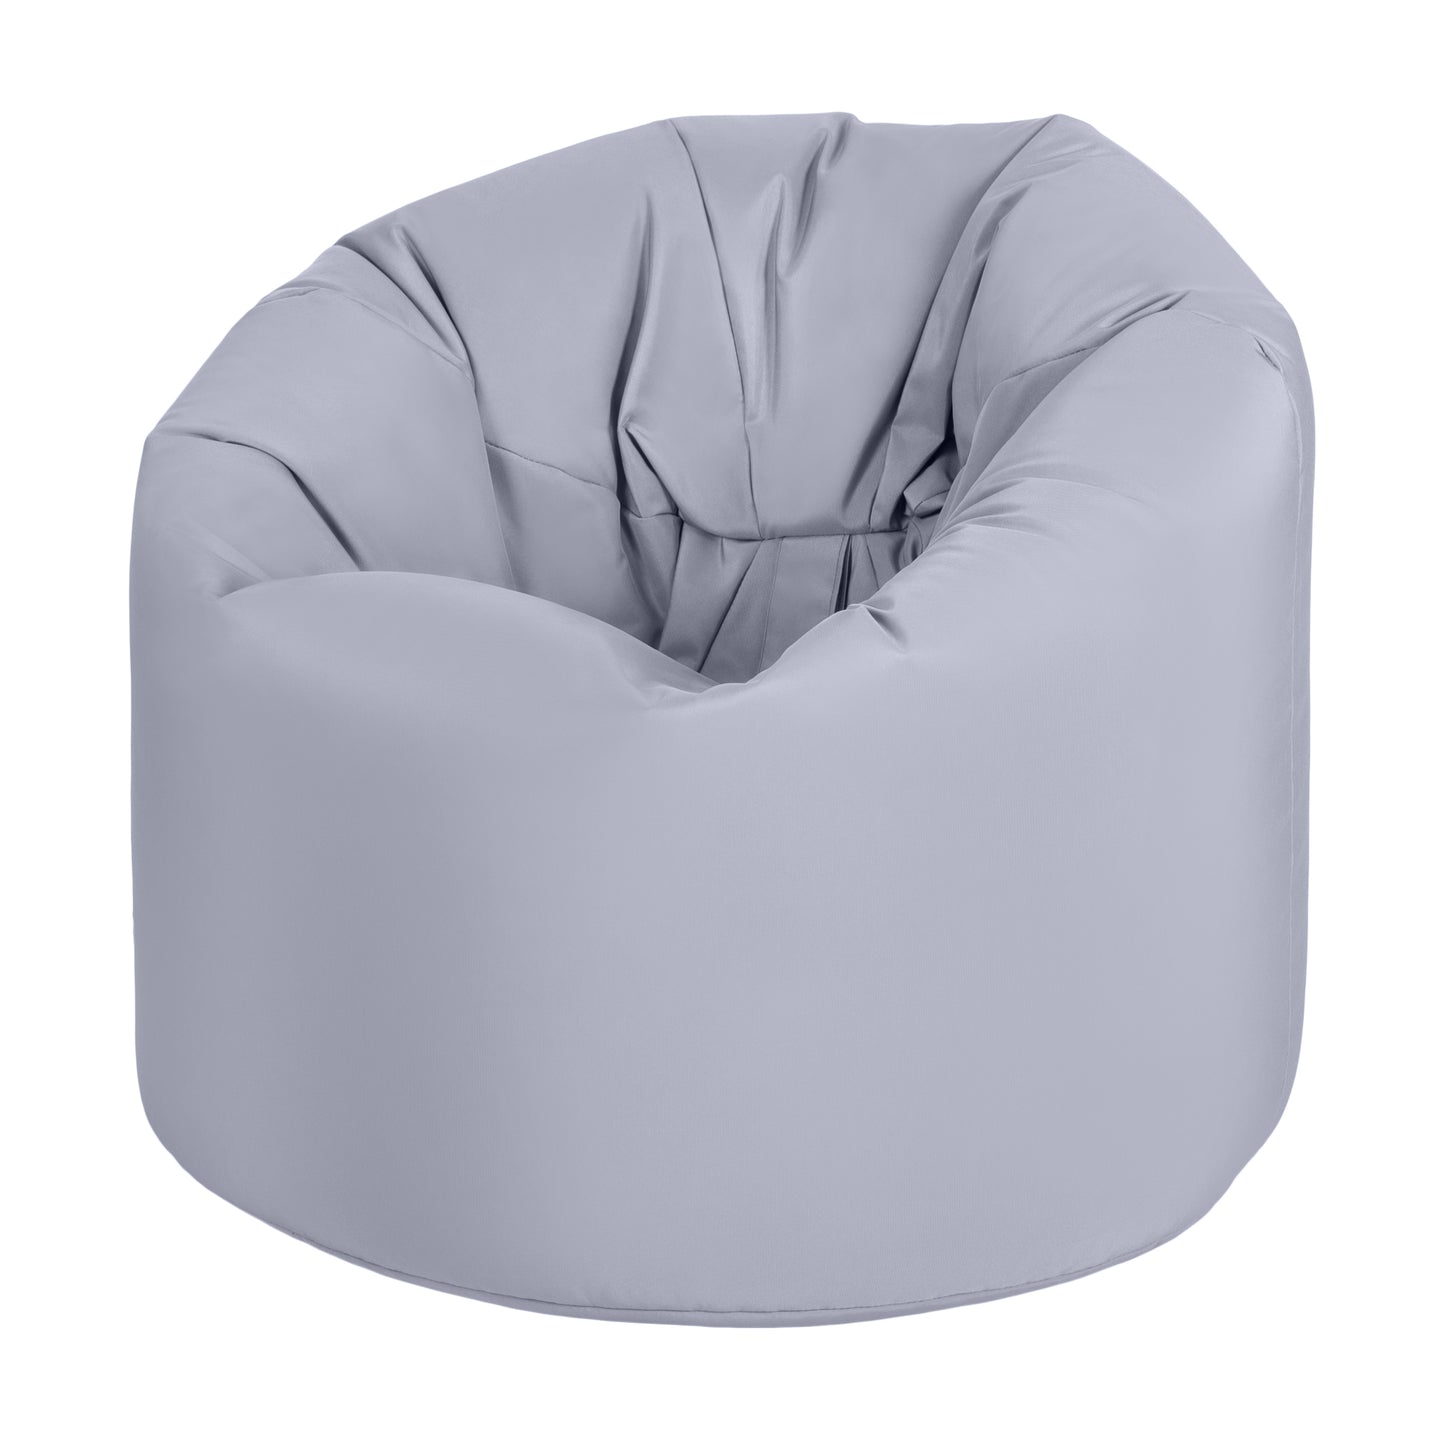 Loft 25 Ready Steady Bed Children's Teens Water Resistant Medium Bean Bag with Polystyrene Beads